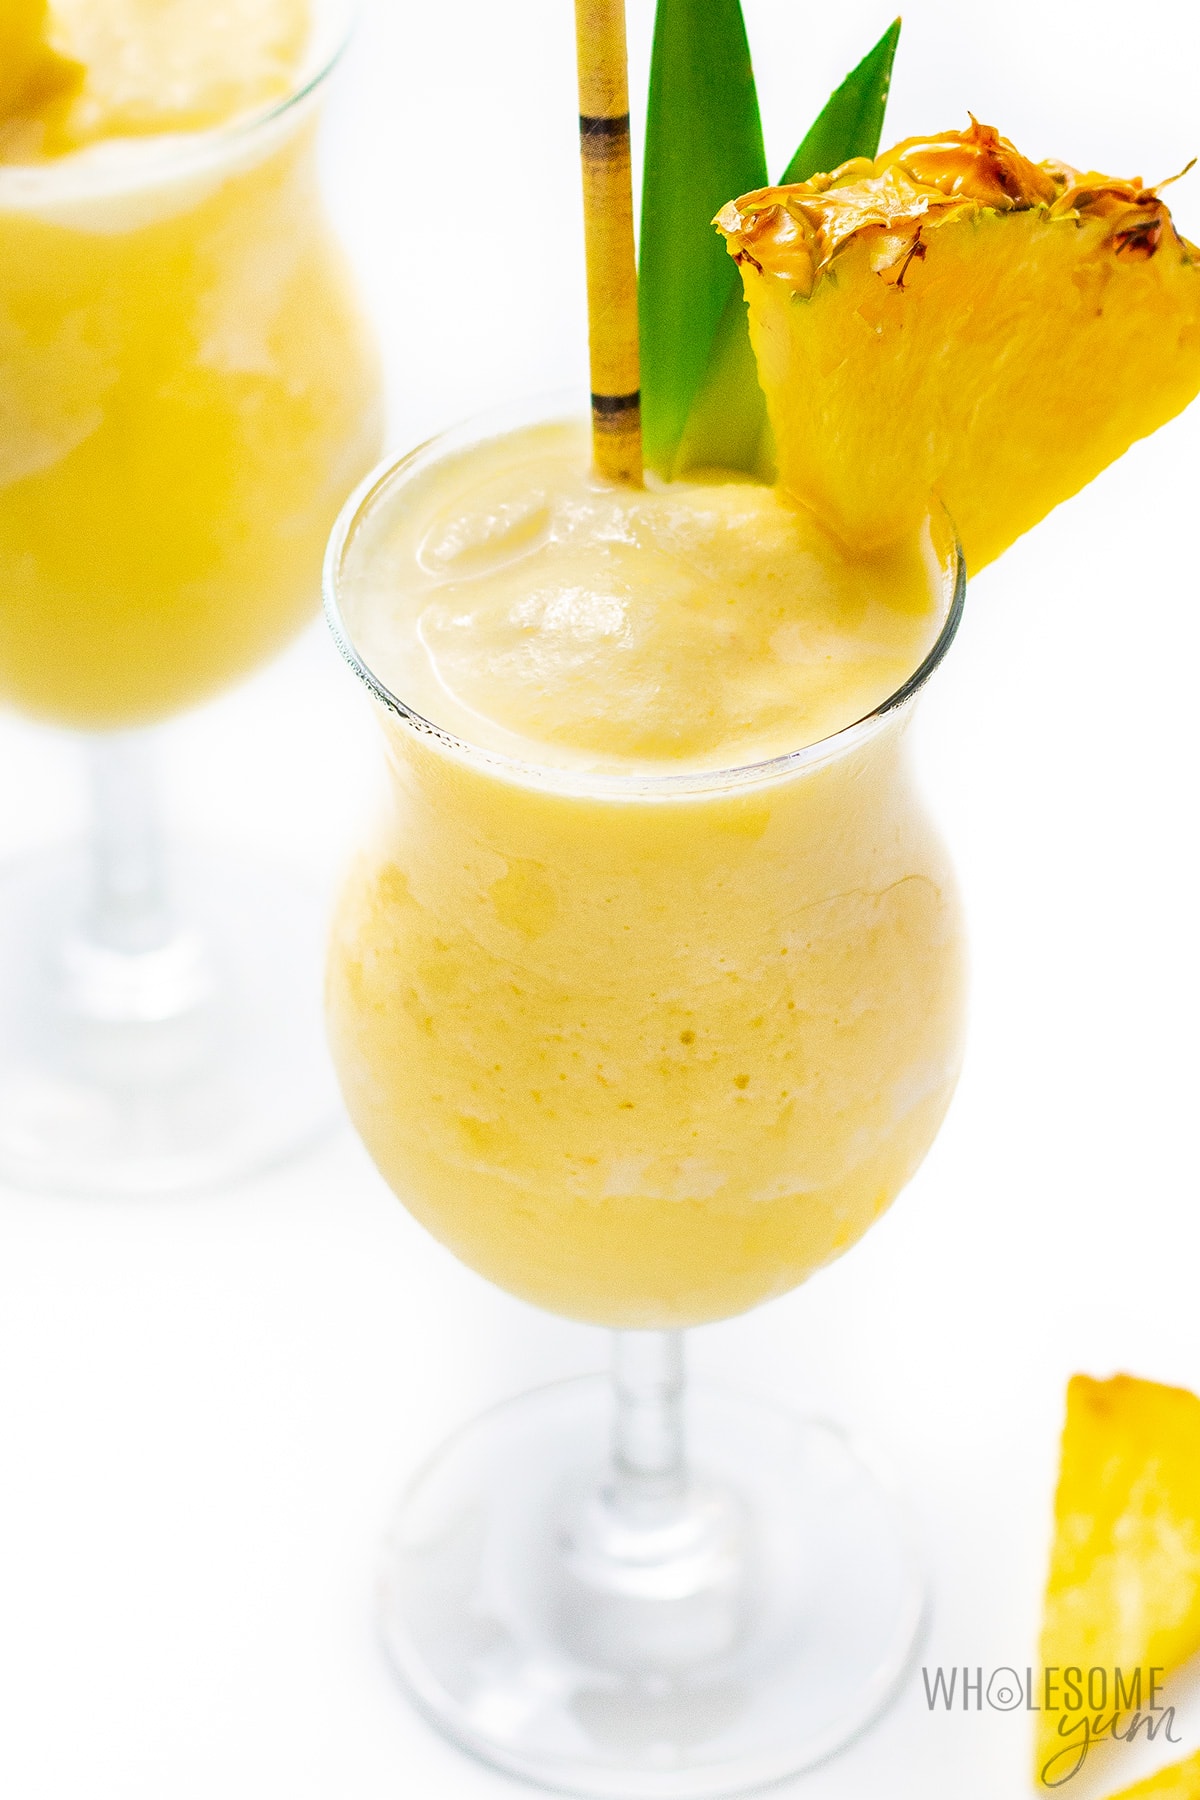 Two glasses of frozen pina colada with fresh pineapple garnishes.